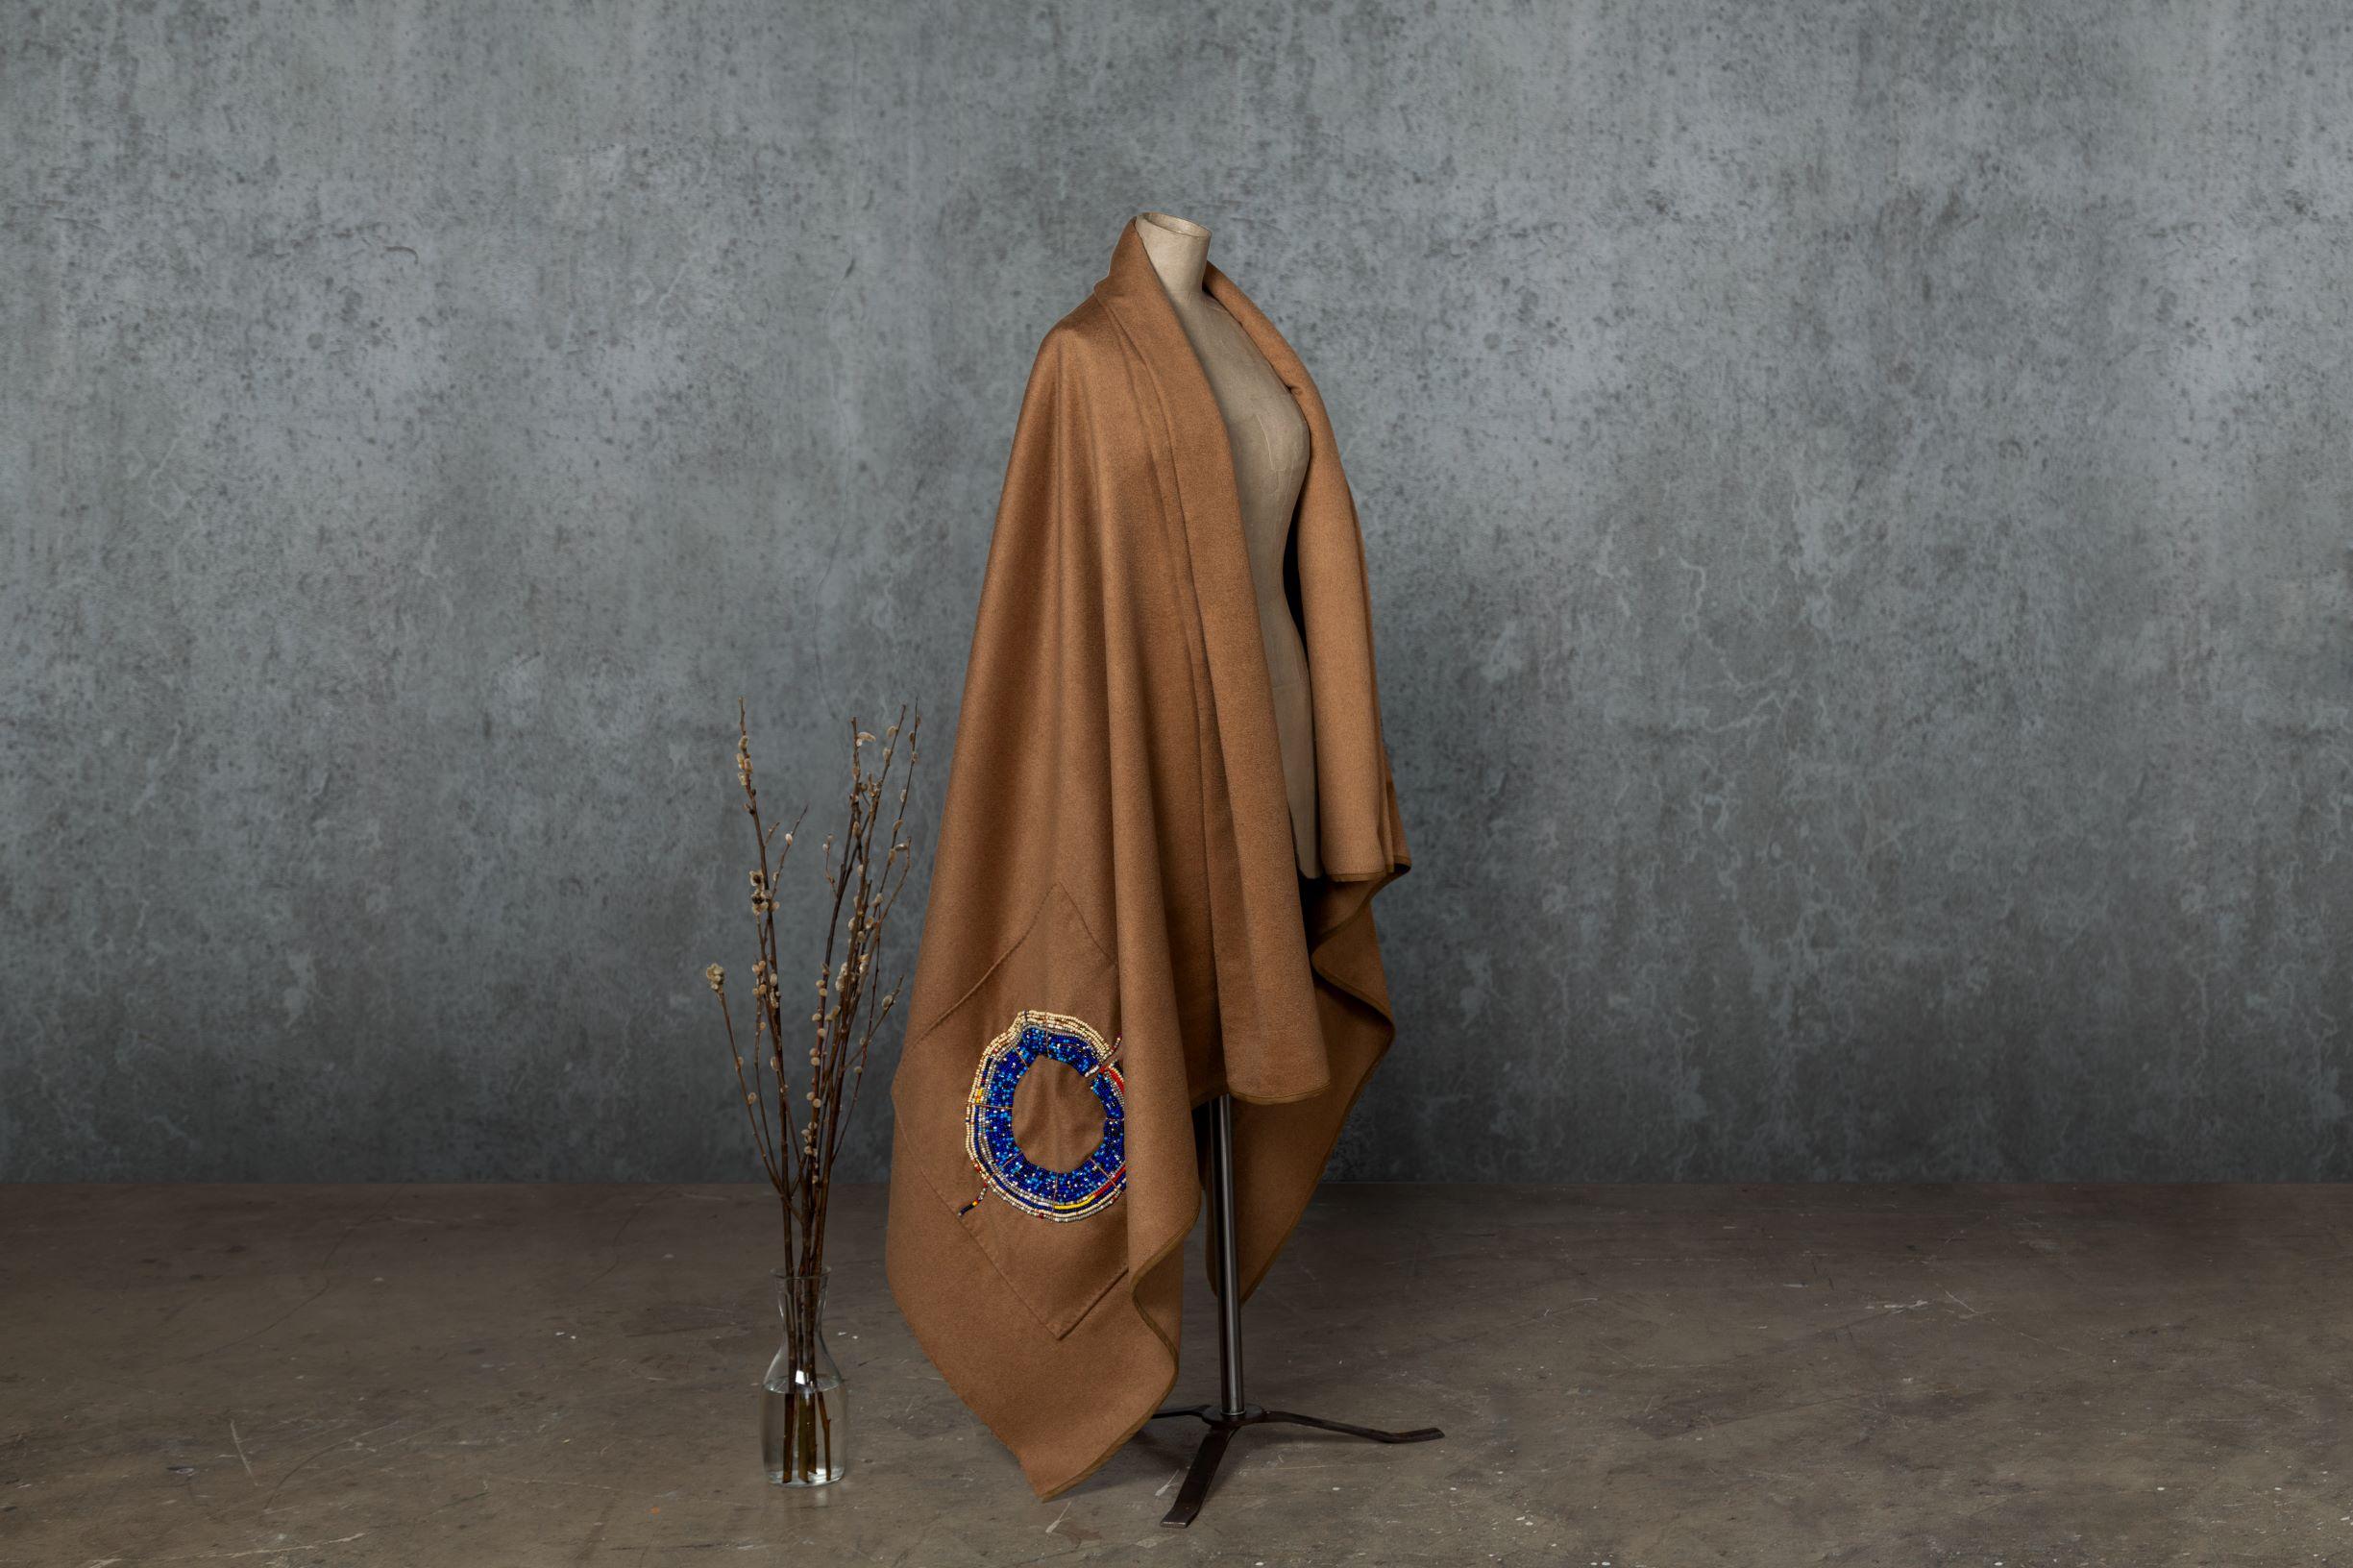 This African design throw from the SoShiro Pok collection is named Marsupia as it is best described as a wraparound cloak – a hybrid of throw and blanket. This cozy cocoon will keep you warm for a stroll with a pleated scarf neckline and a large